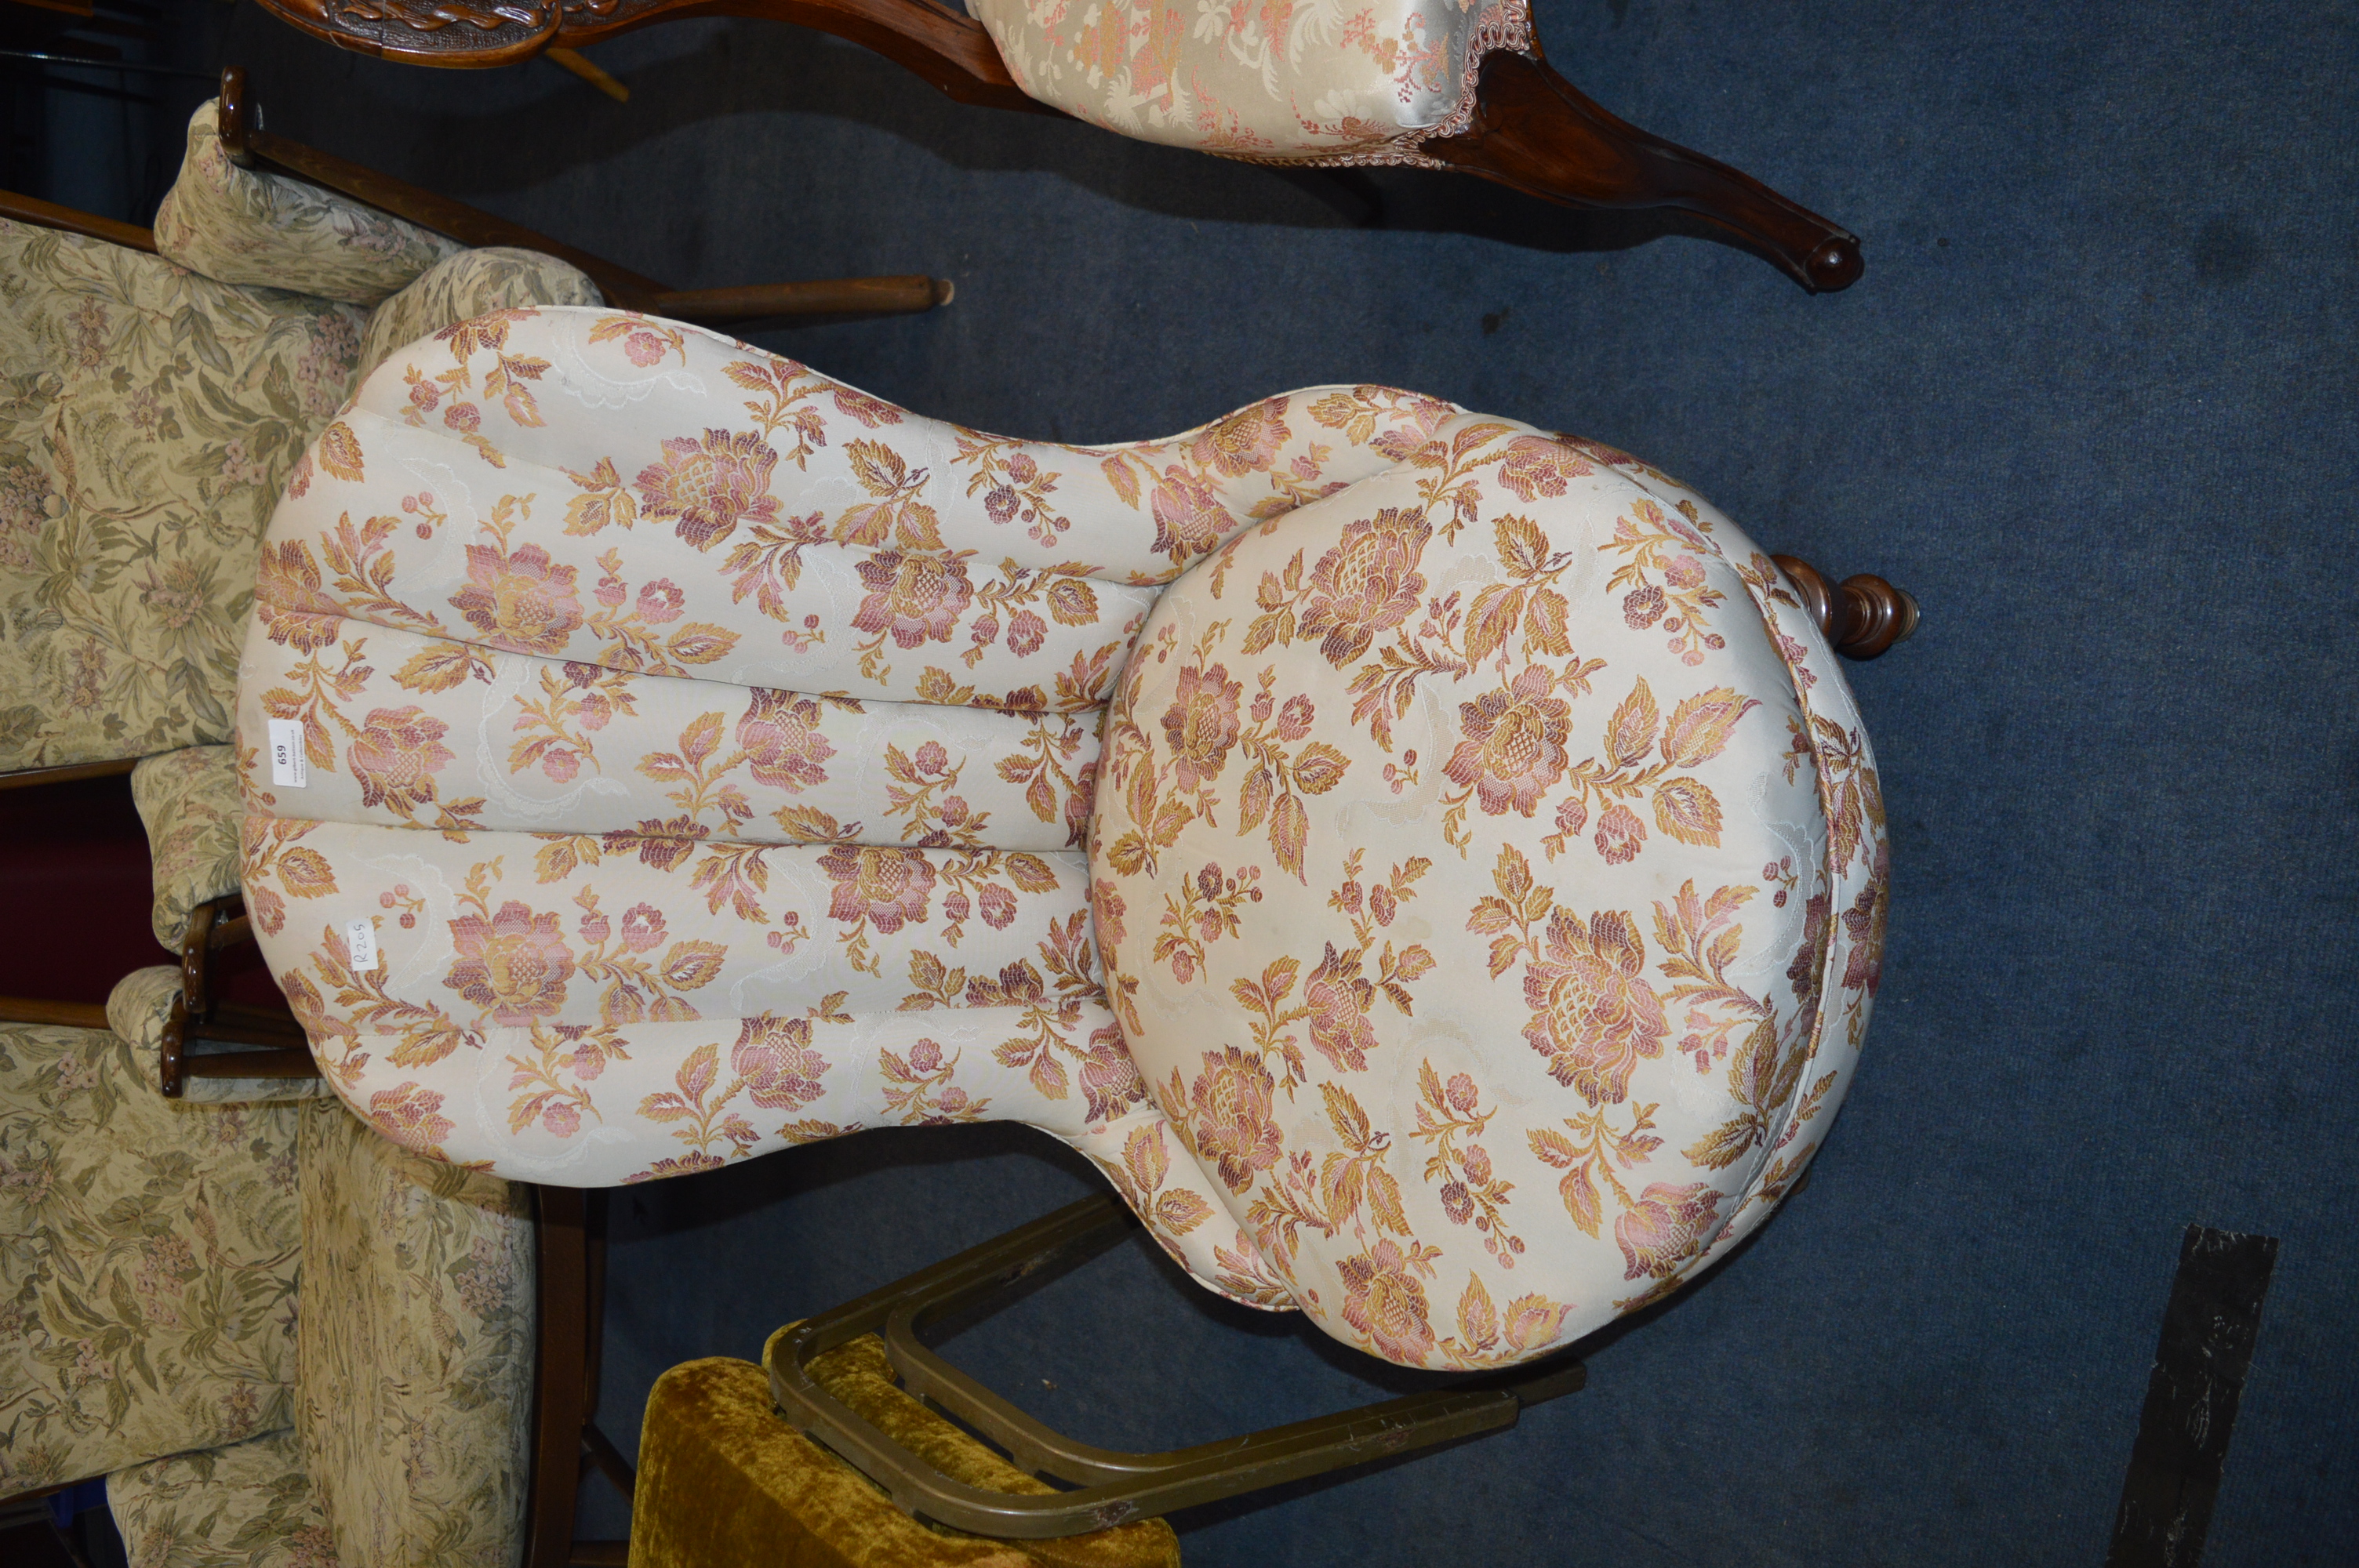 Victorian Nursing Chair with Floral Upholstery - Image 2 of 4